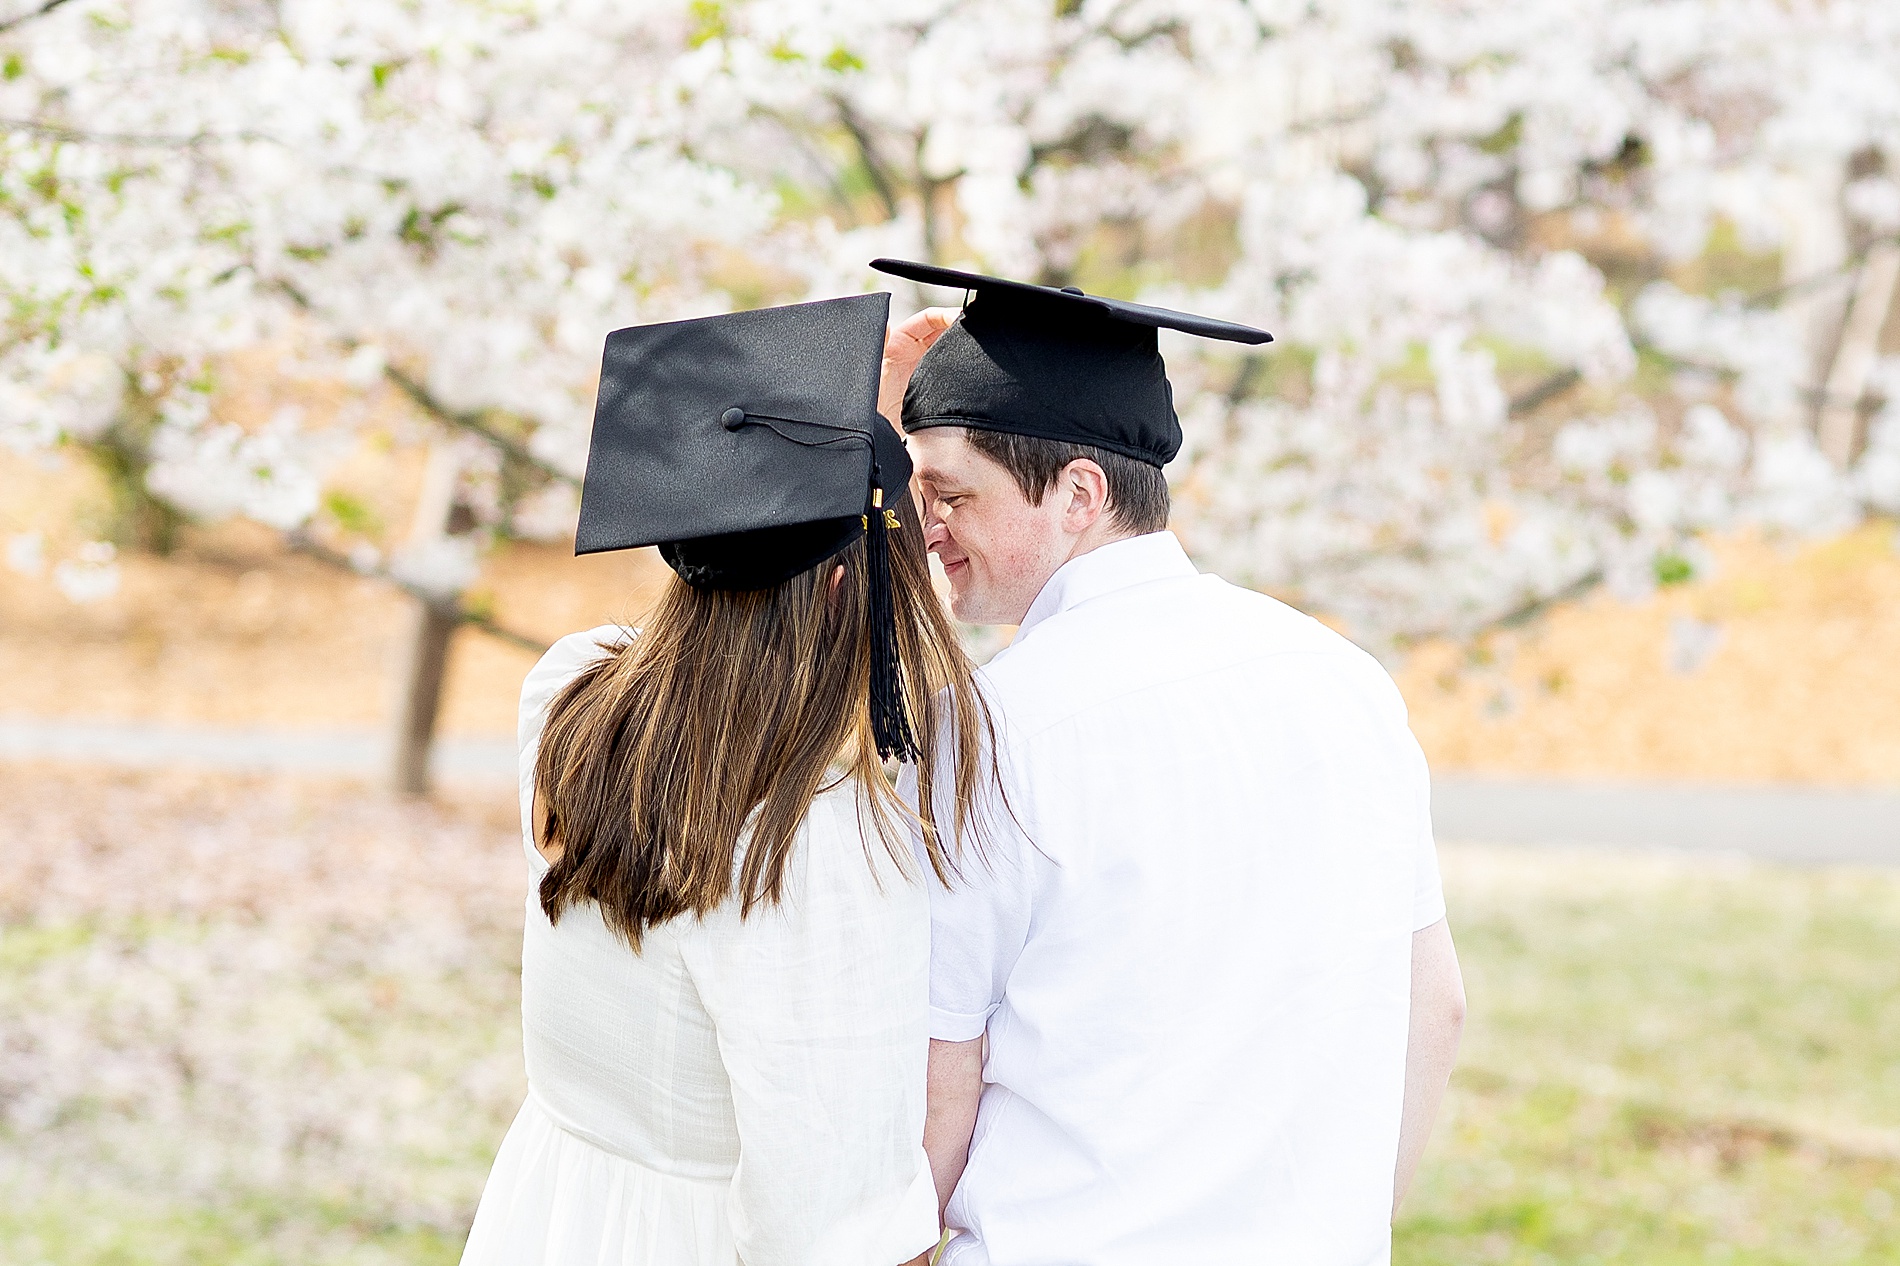 Legacy Park Spring Graduation Session of couple in graduation caps 